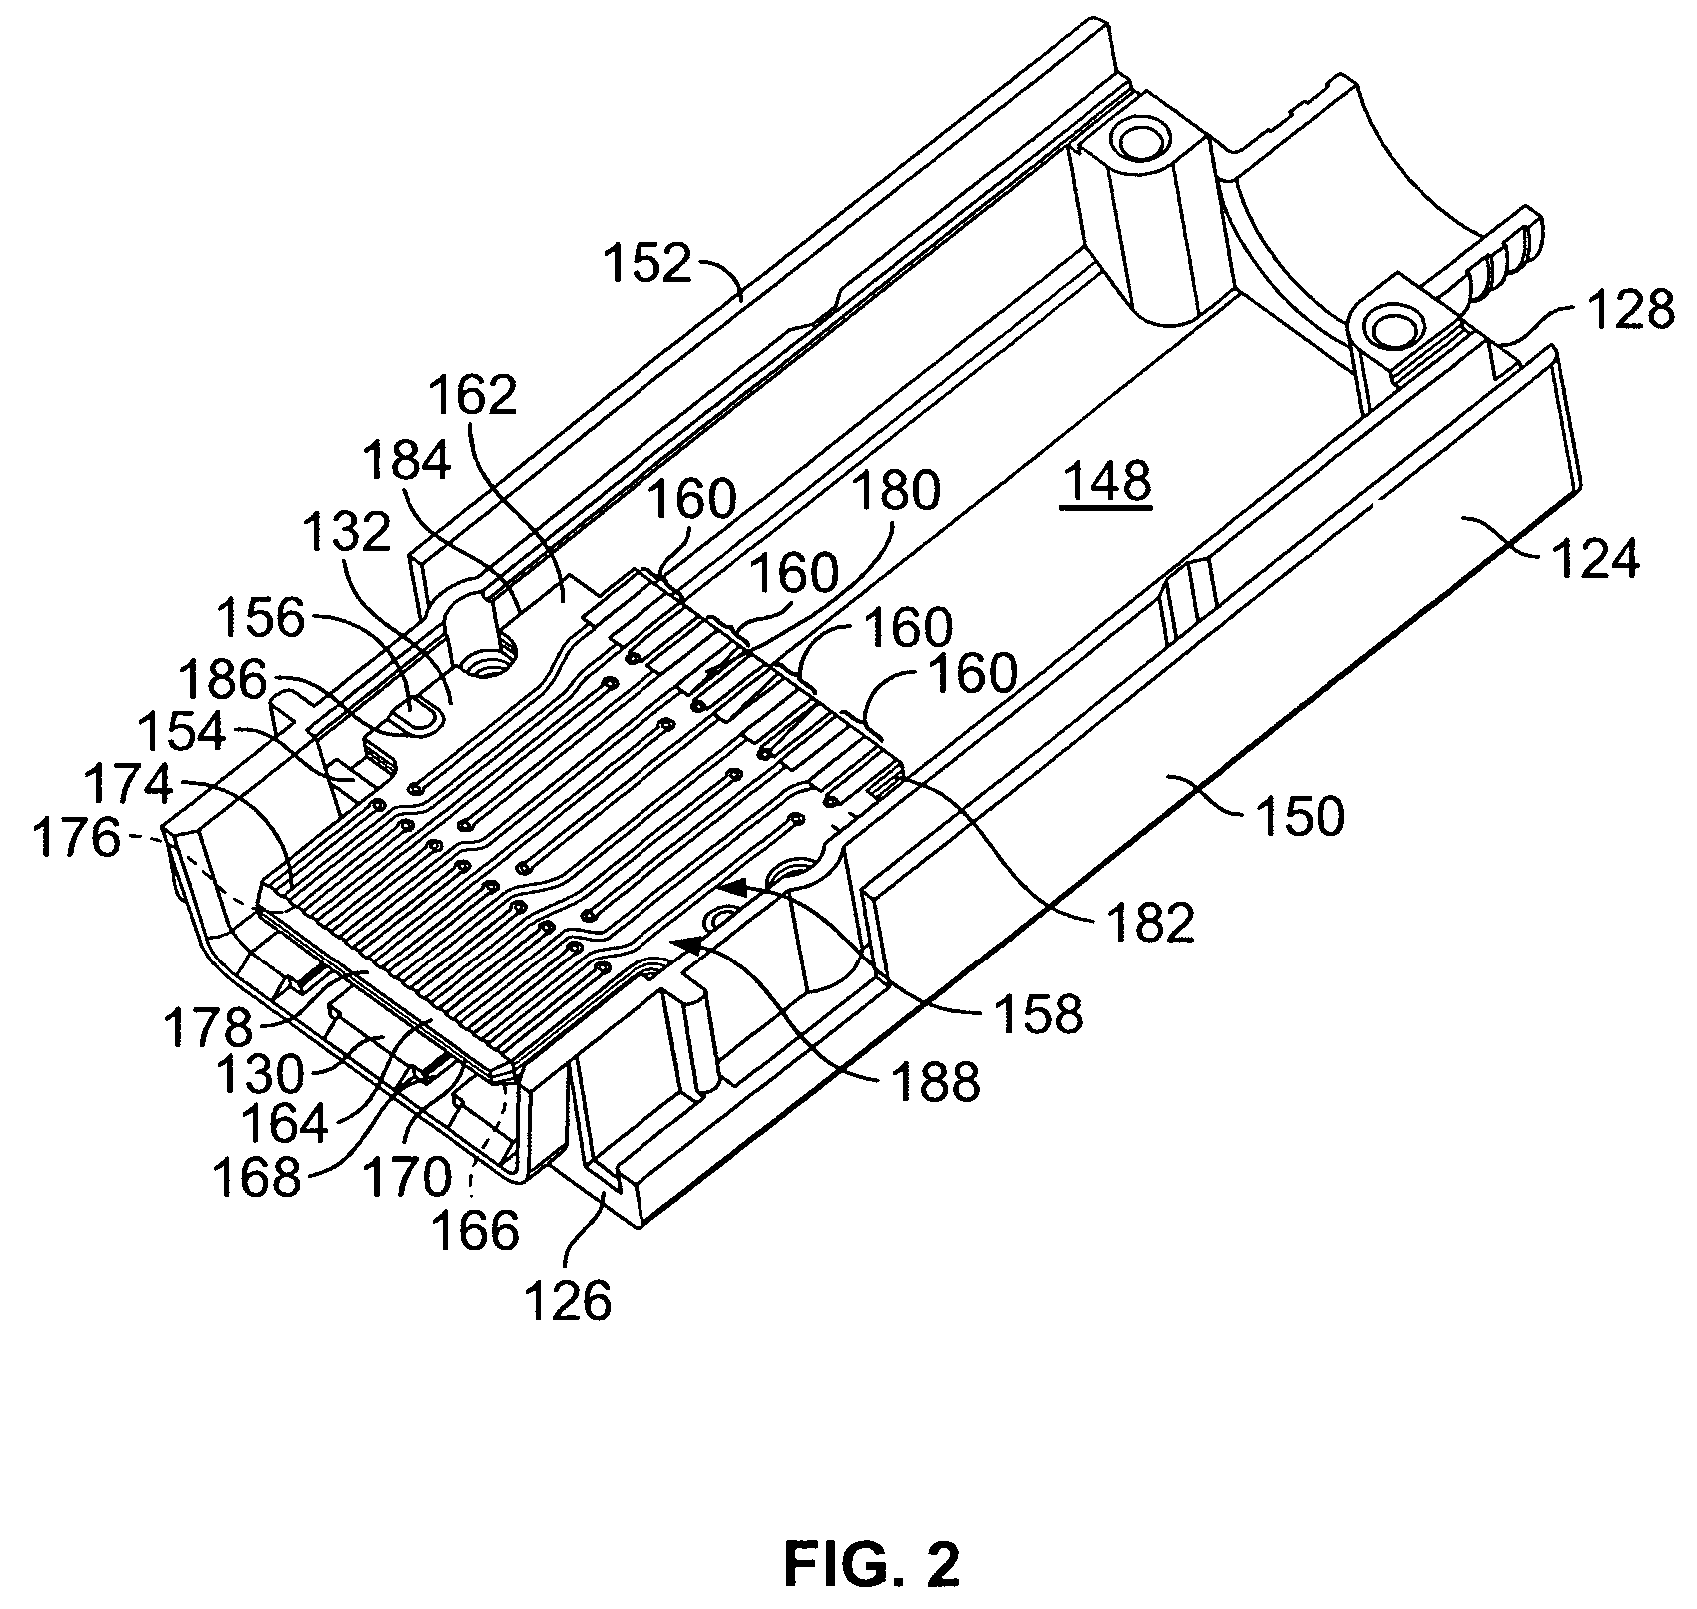 Cable assembly with opposed inverse wire management configurations